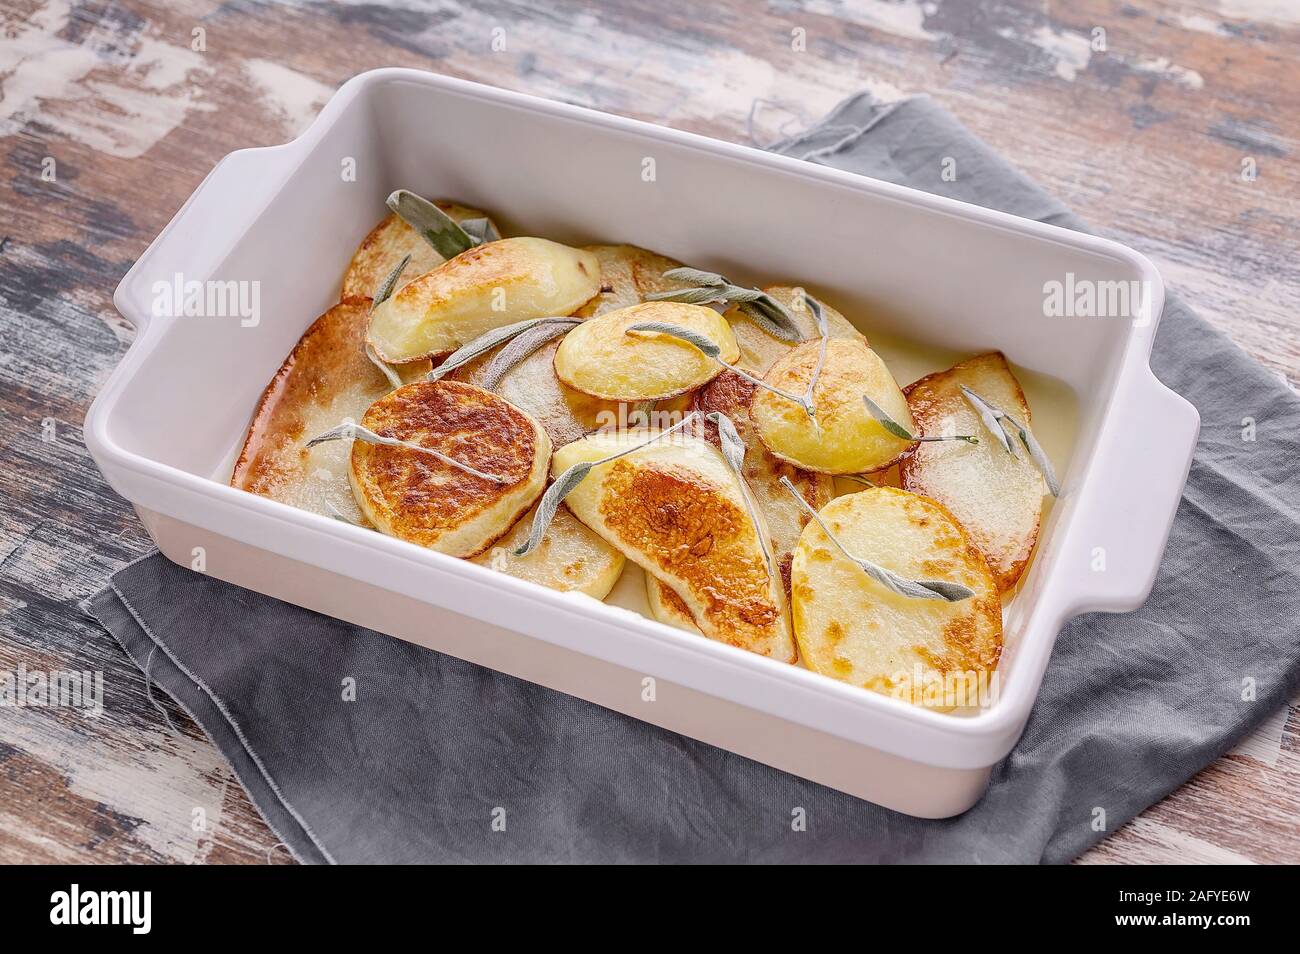 Closeup baked sliced potato with red onion and herbs: sage, rosemary and thyme in a ceramic baking dish. Stock Photo